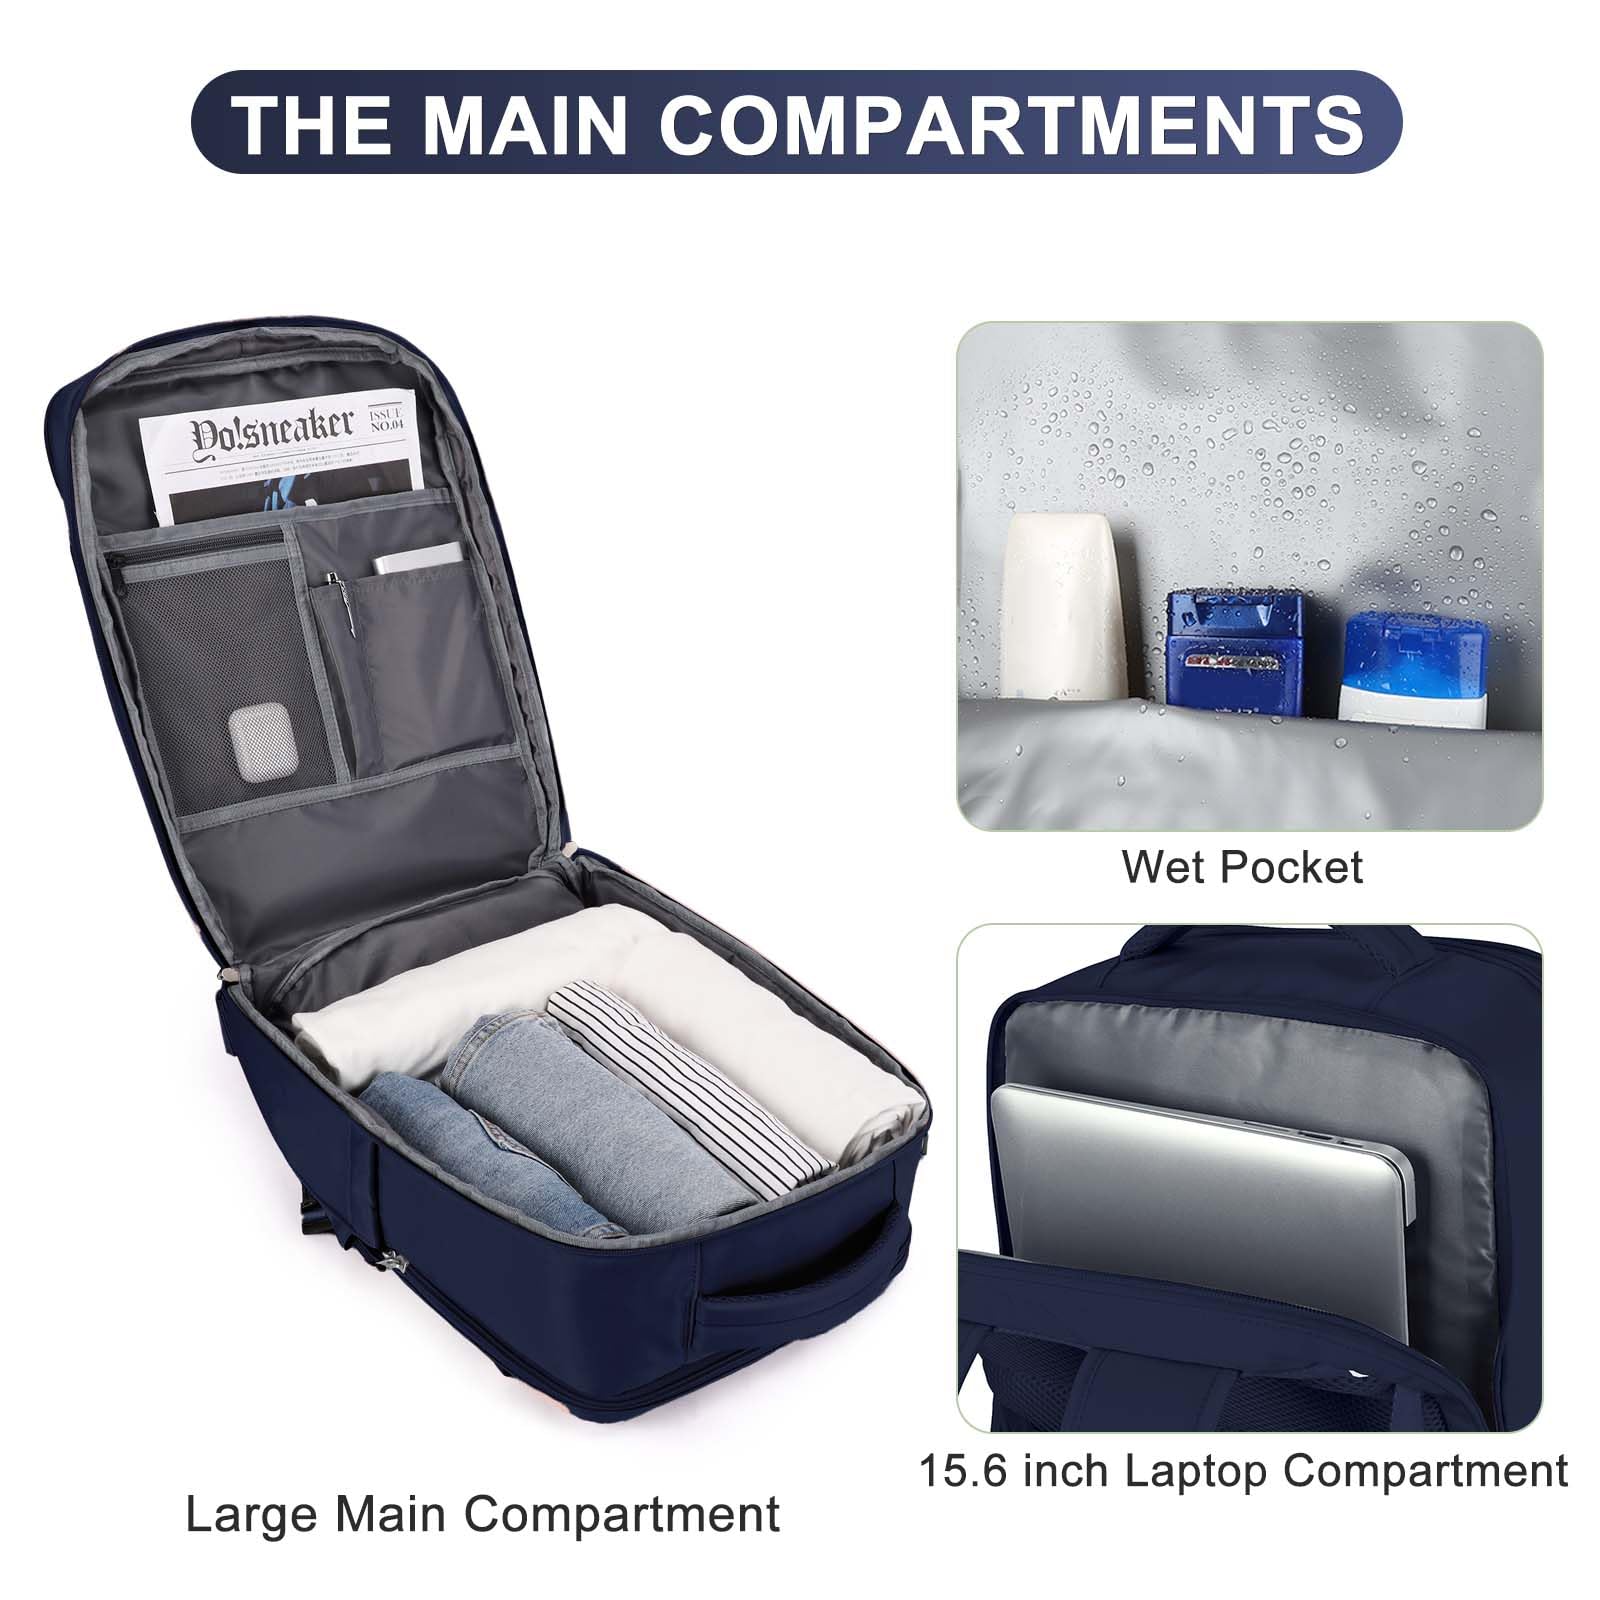 Laptop Travel Backpack For Women Men Airline Approved Carry On Bags For Airplanes Underseat Luggage Backpack For Traveling On Airplane Personal Item Travel Bag For Airlines Travel Essentials Navy Blue